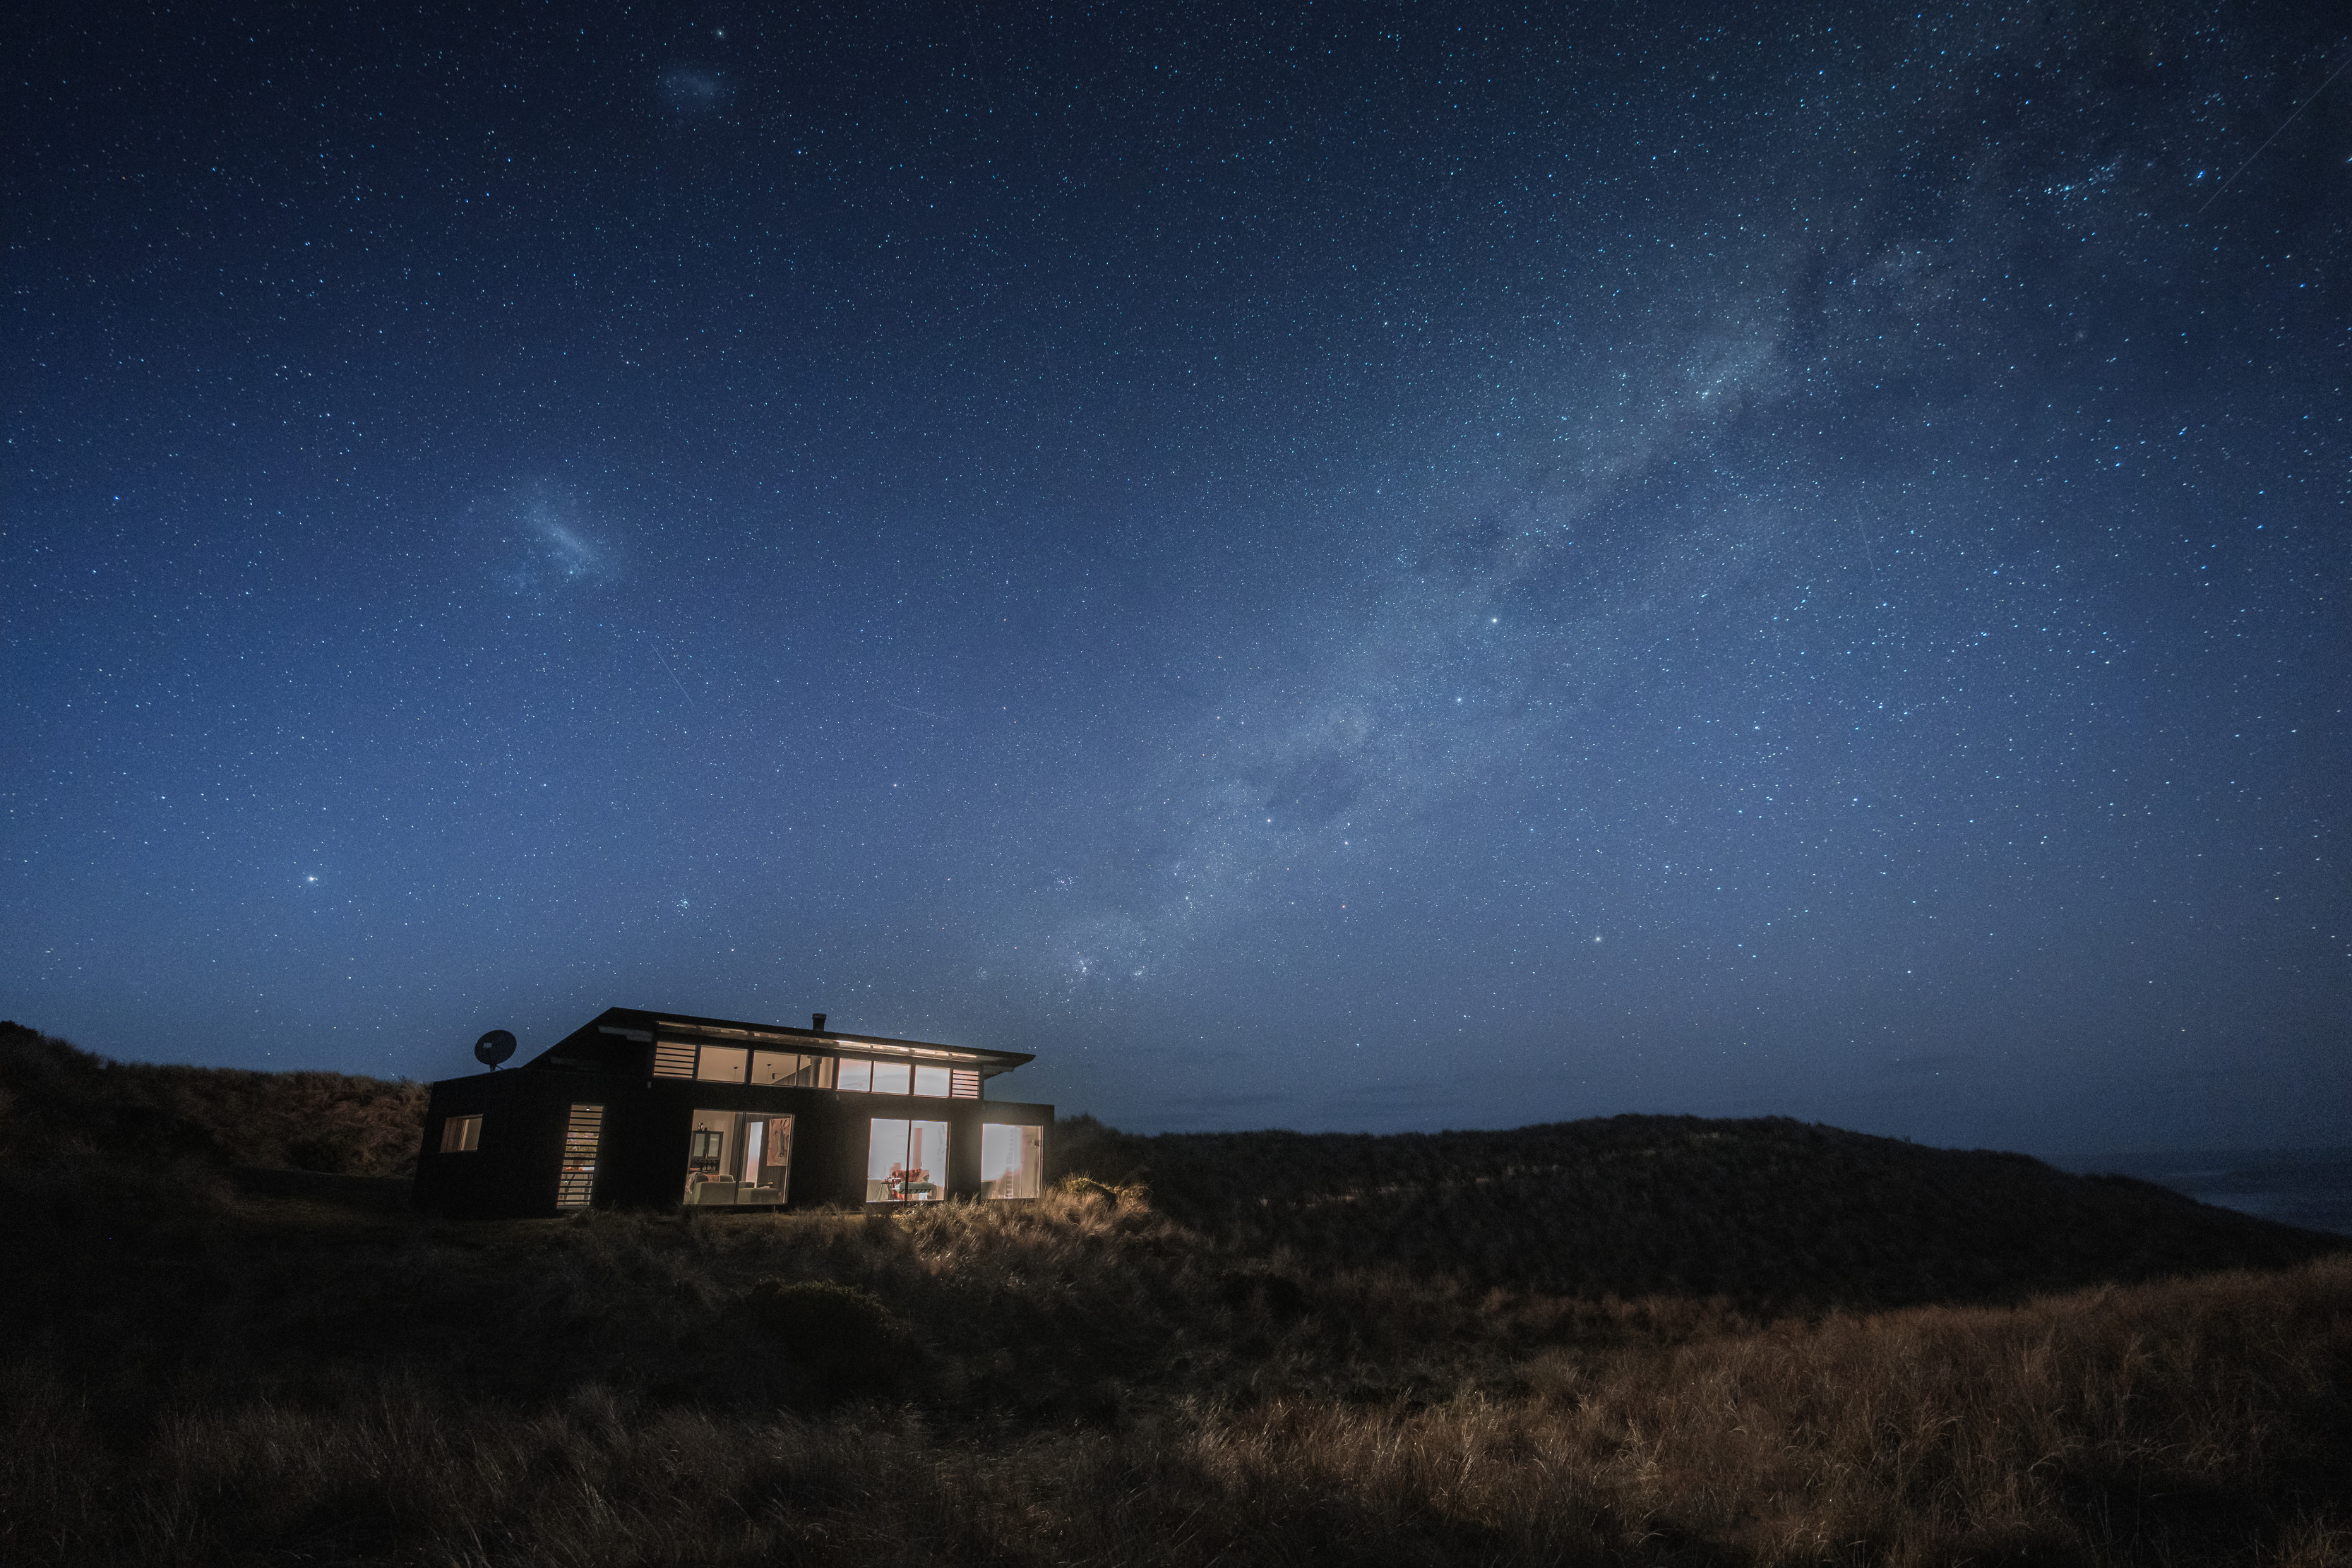 Landscape image of Kittawa Lodge at night with the sky full of stars.